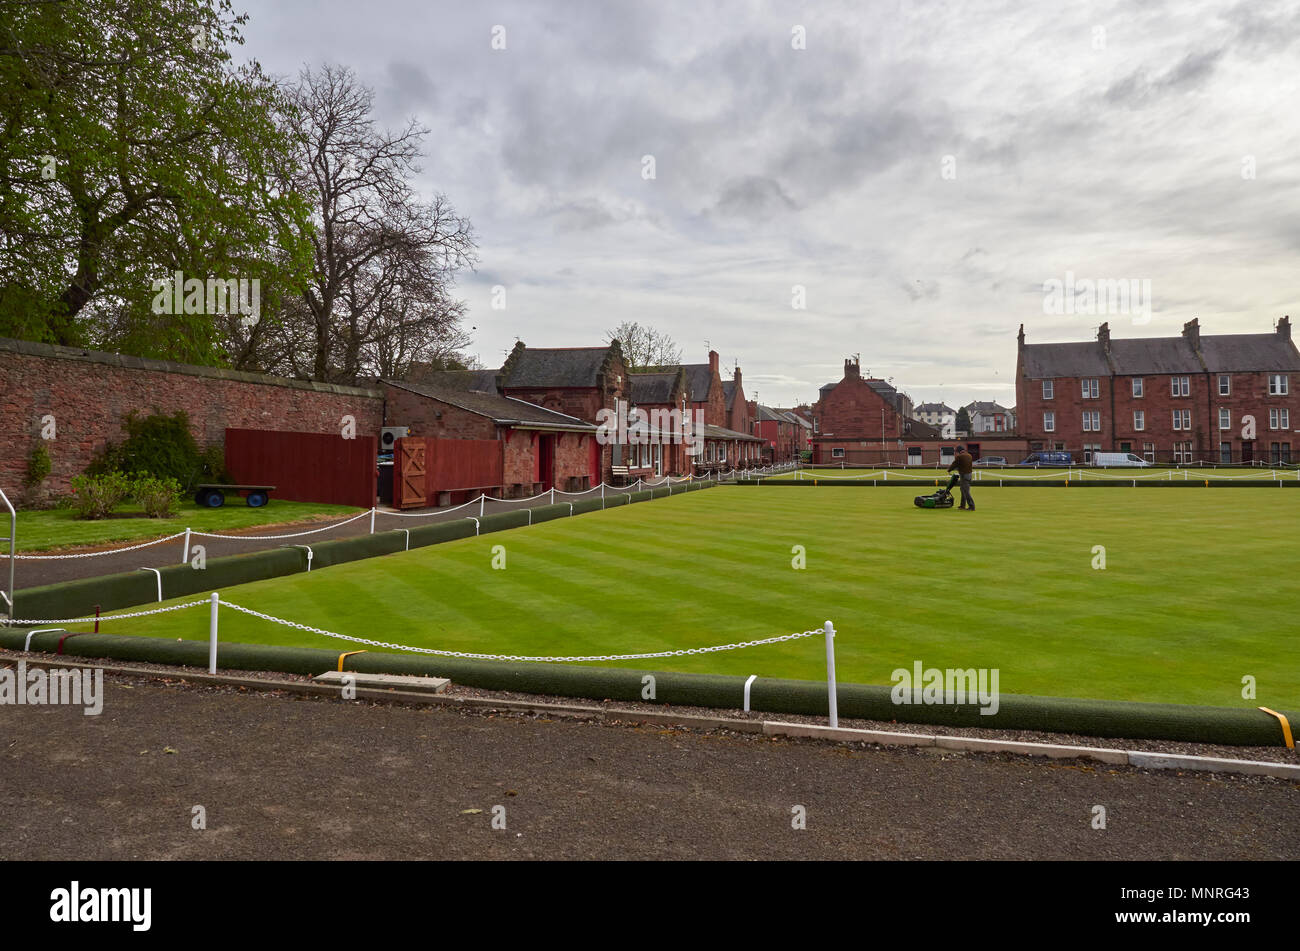 The Bowling Greens of Arbroath Abbey Bowling Club being closely mowed one early morning in May. Arbroath, Angus, Scotland. Stock Photo